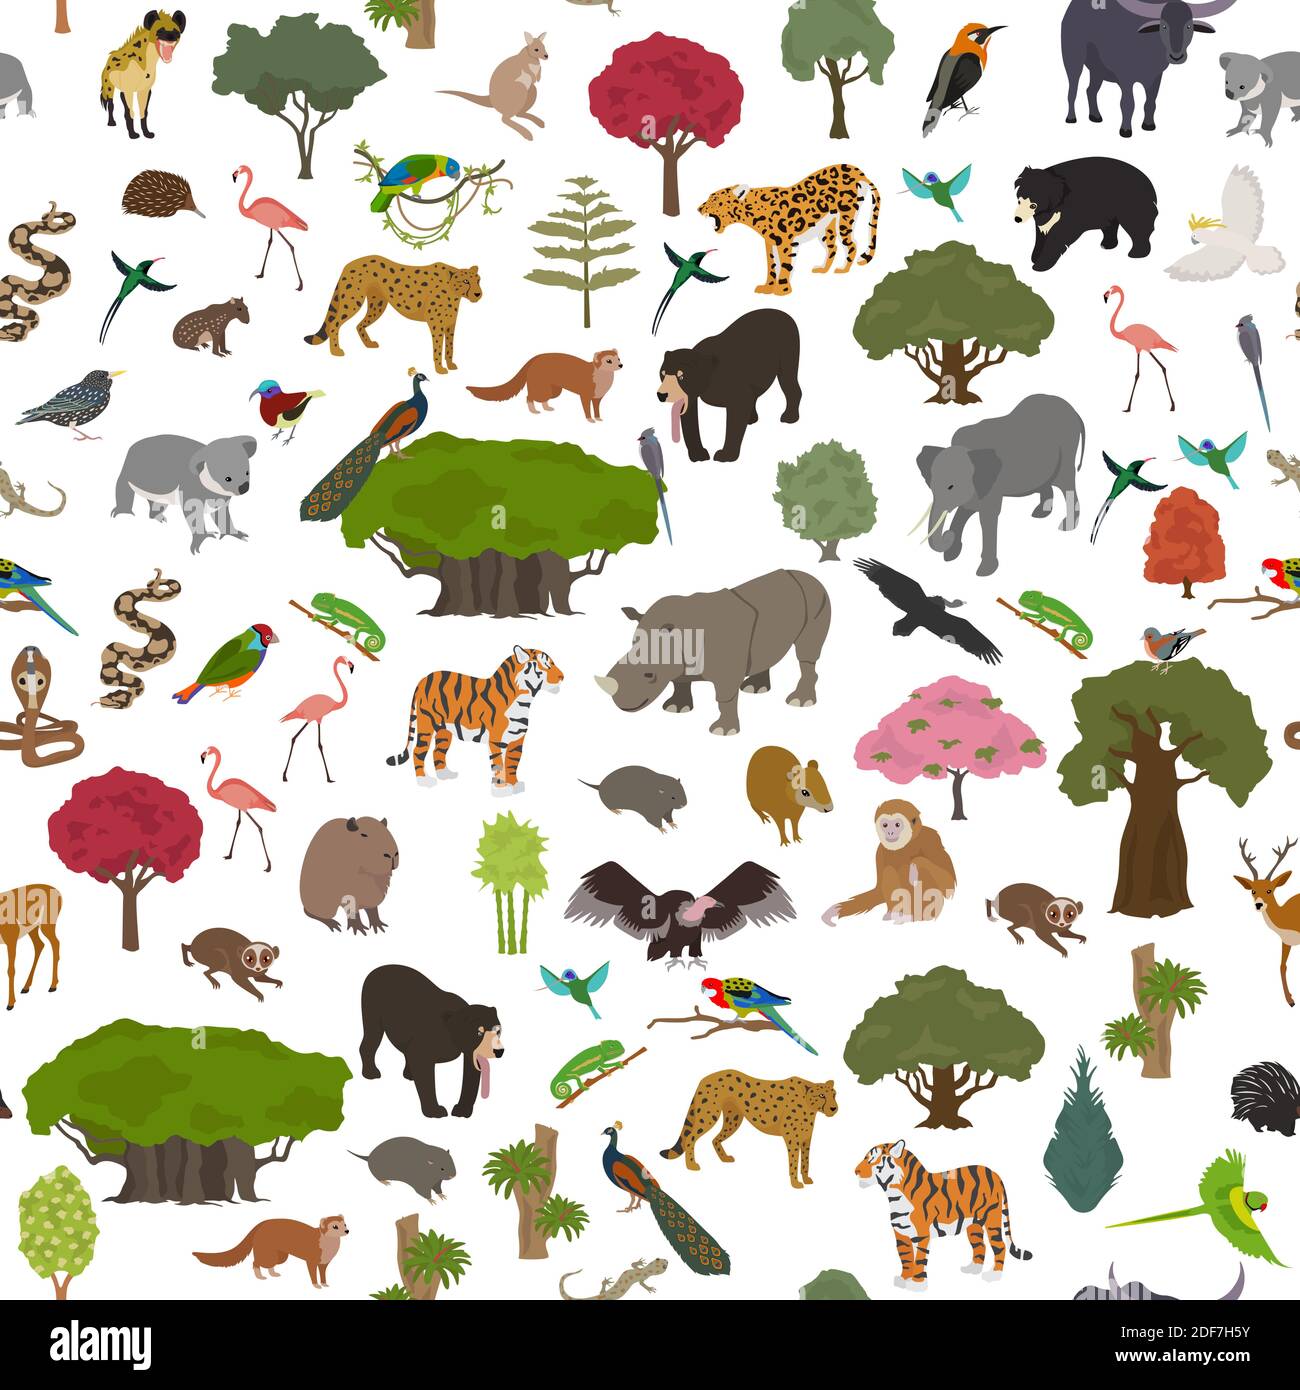 Tropical and subtropical dry broadleaf forest biome, natural region seamless pattern. Seasonal forests. Animals, birds and vegetations ecosystem desig Stock Vector